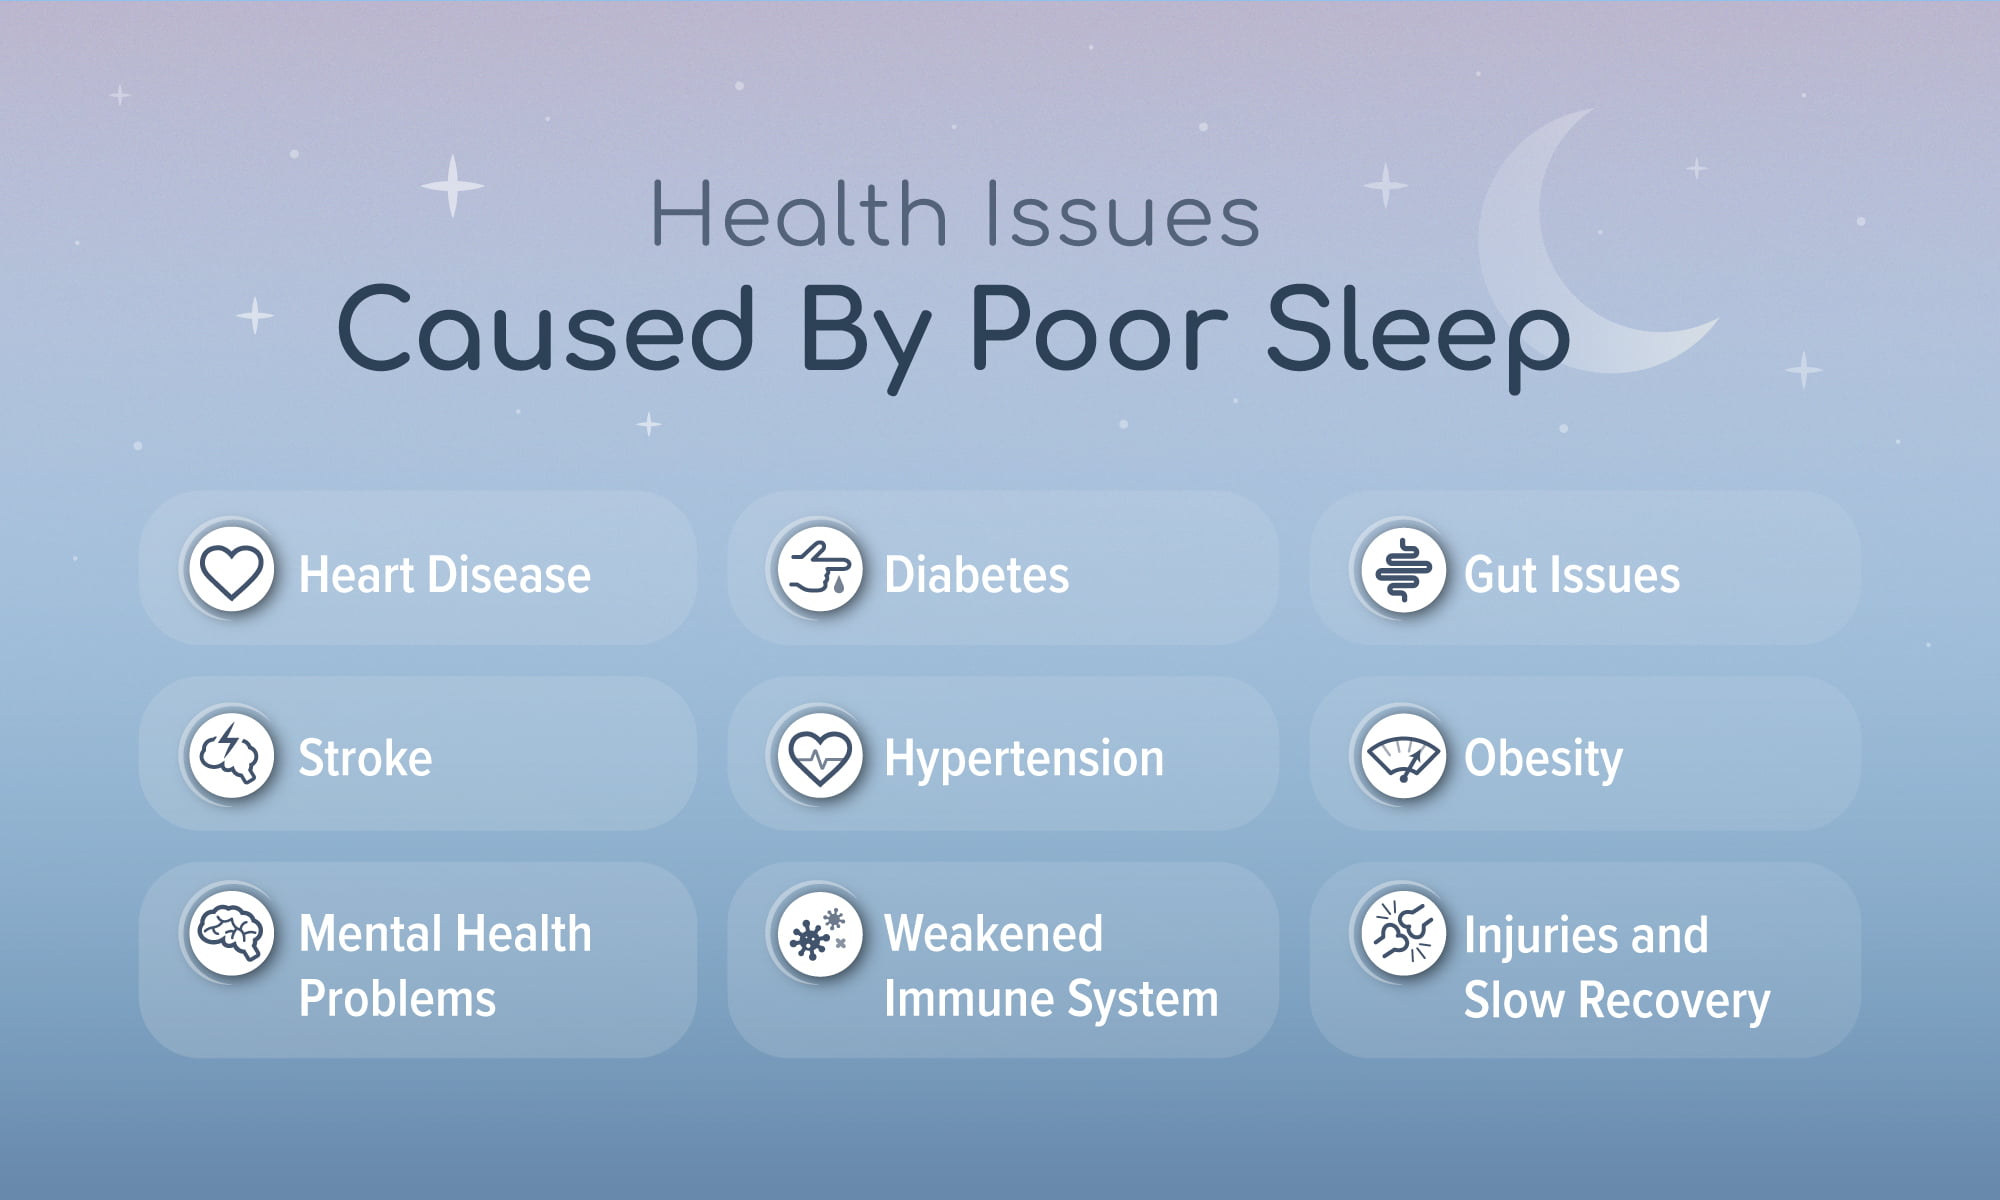 An infographic detailing health issues caused by poor sleep, including heart disease, diabetes, gut issues, stroke, hypertension, obesity, mental health problems, weakened immune system, injuries, and slow recovery, serving as a visual explanation of why is sleep important.